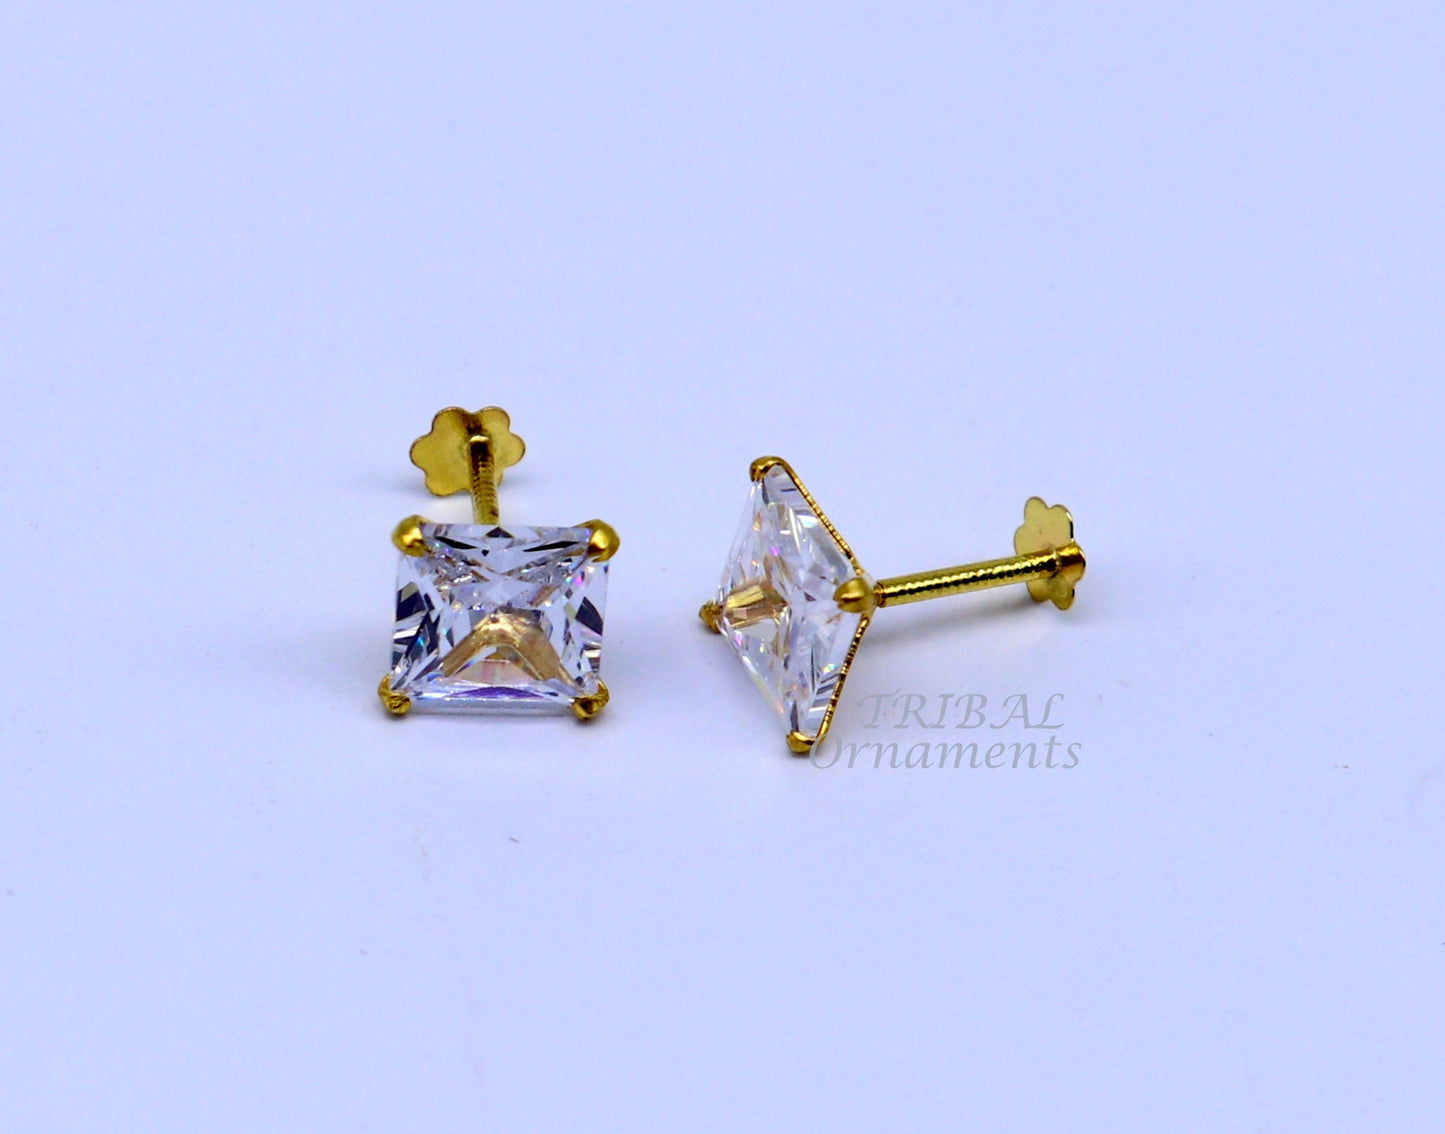 6mm OR 5 mm 18kt yellow gold handmade single cubic zircon stone square shape stud earring cartilage customized unisex jewelry er143 - TRIBAL ORNAMENTS